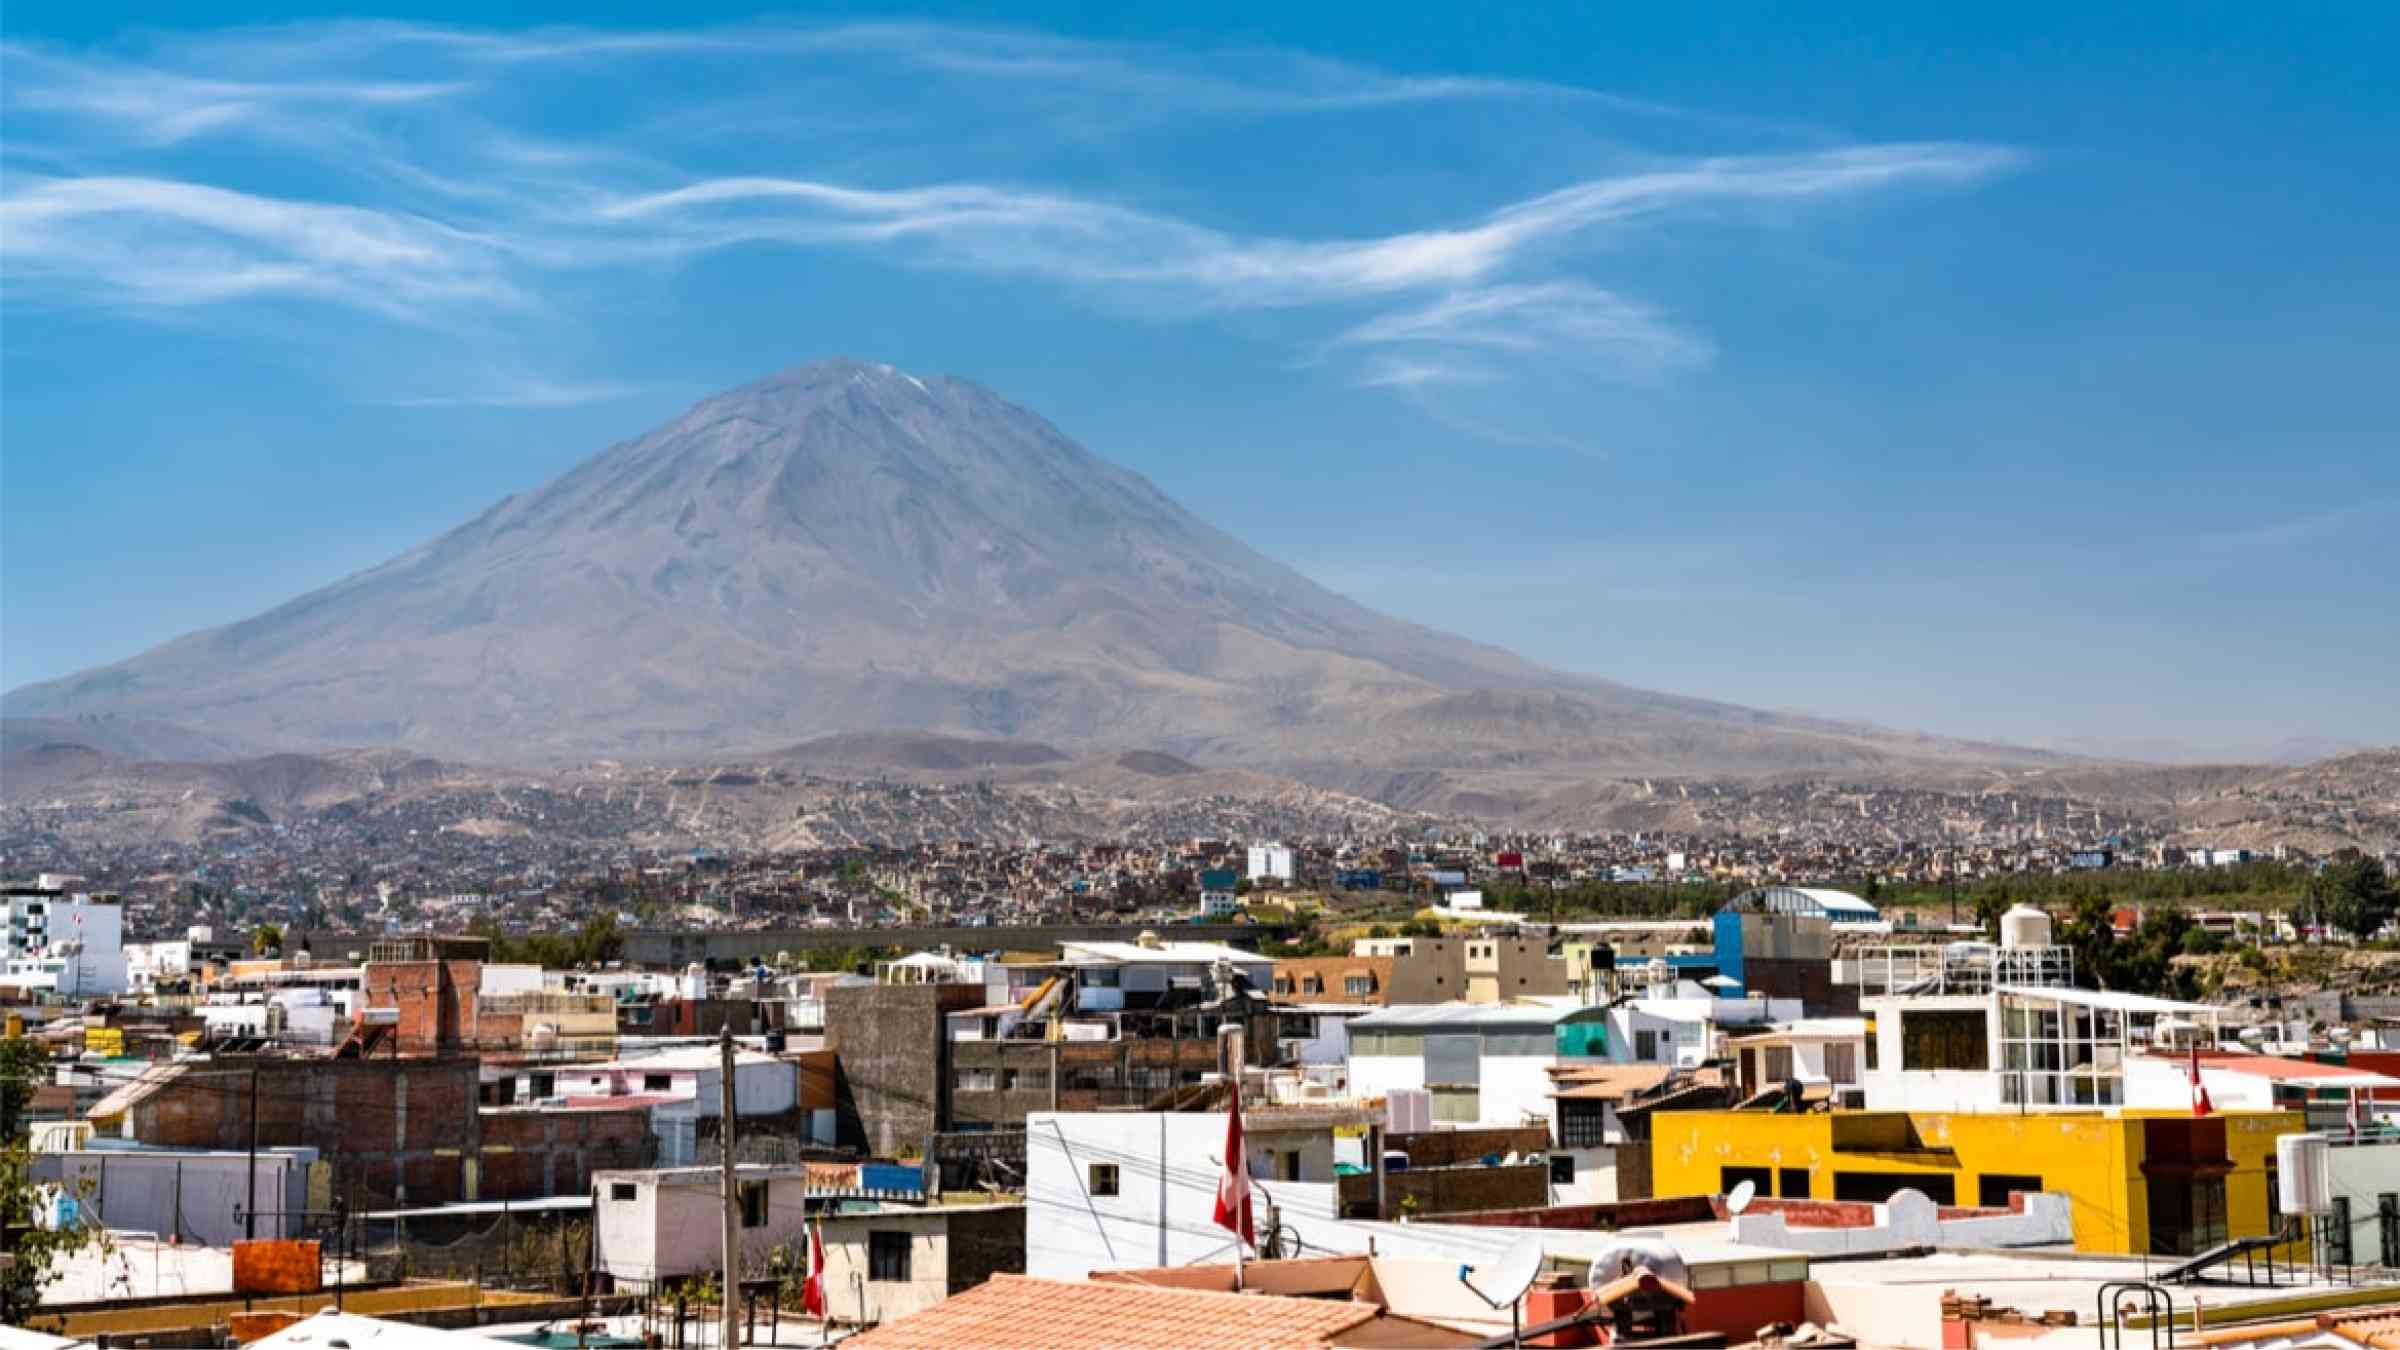 View of the volcano behing the city of Arequipa, Peru